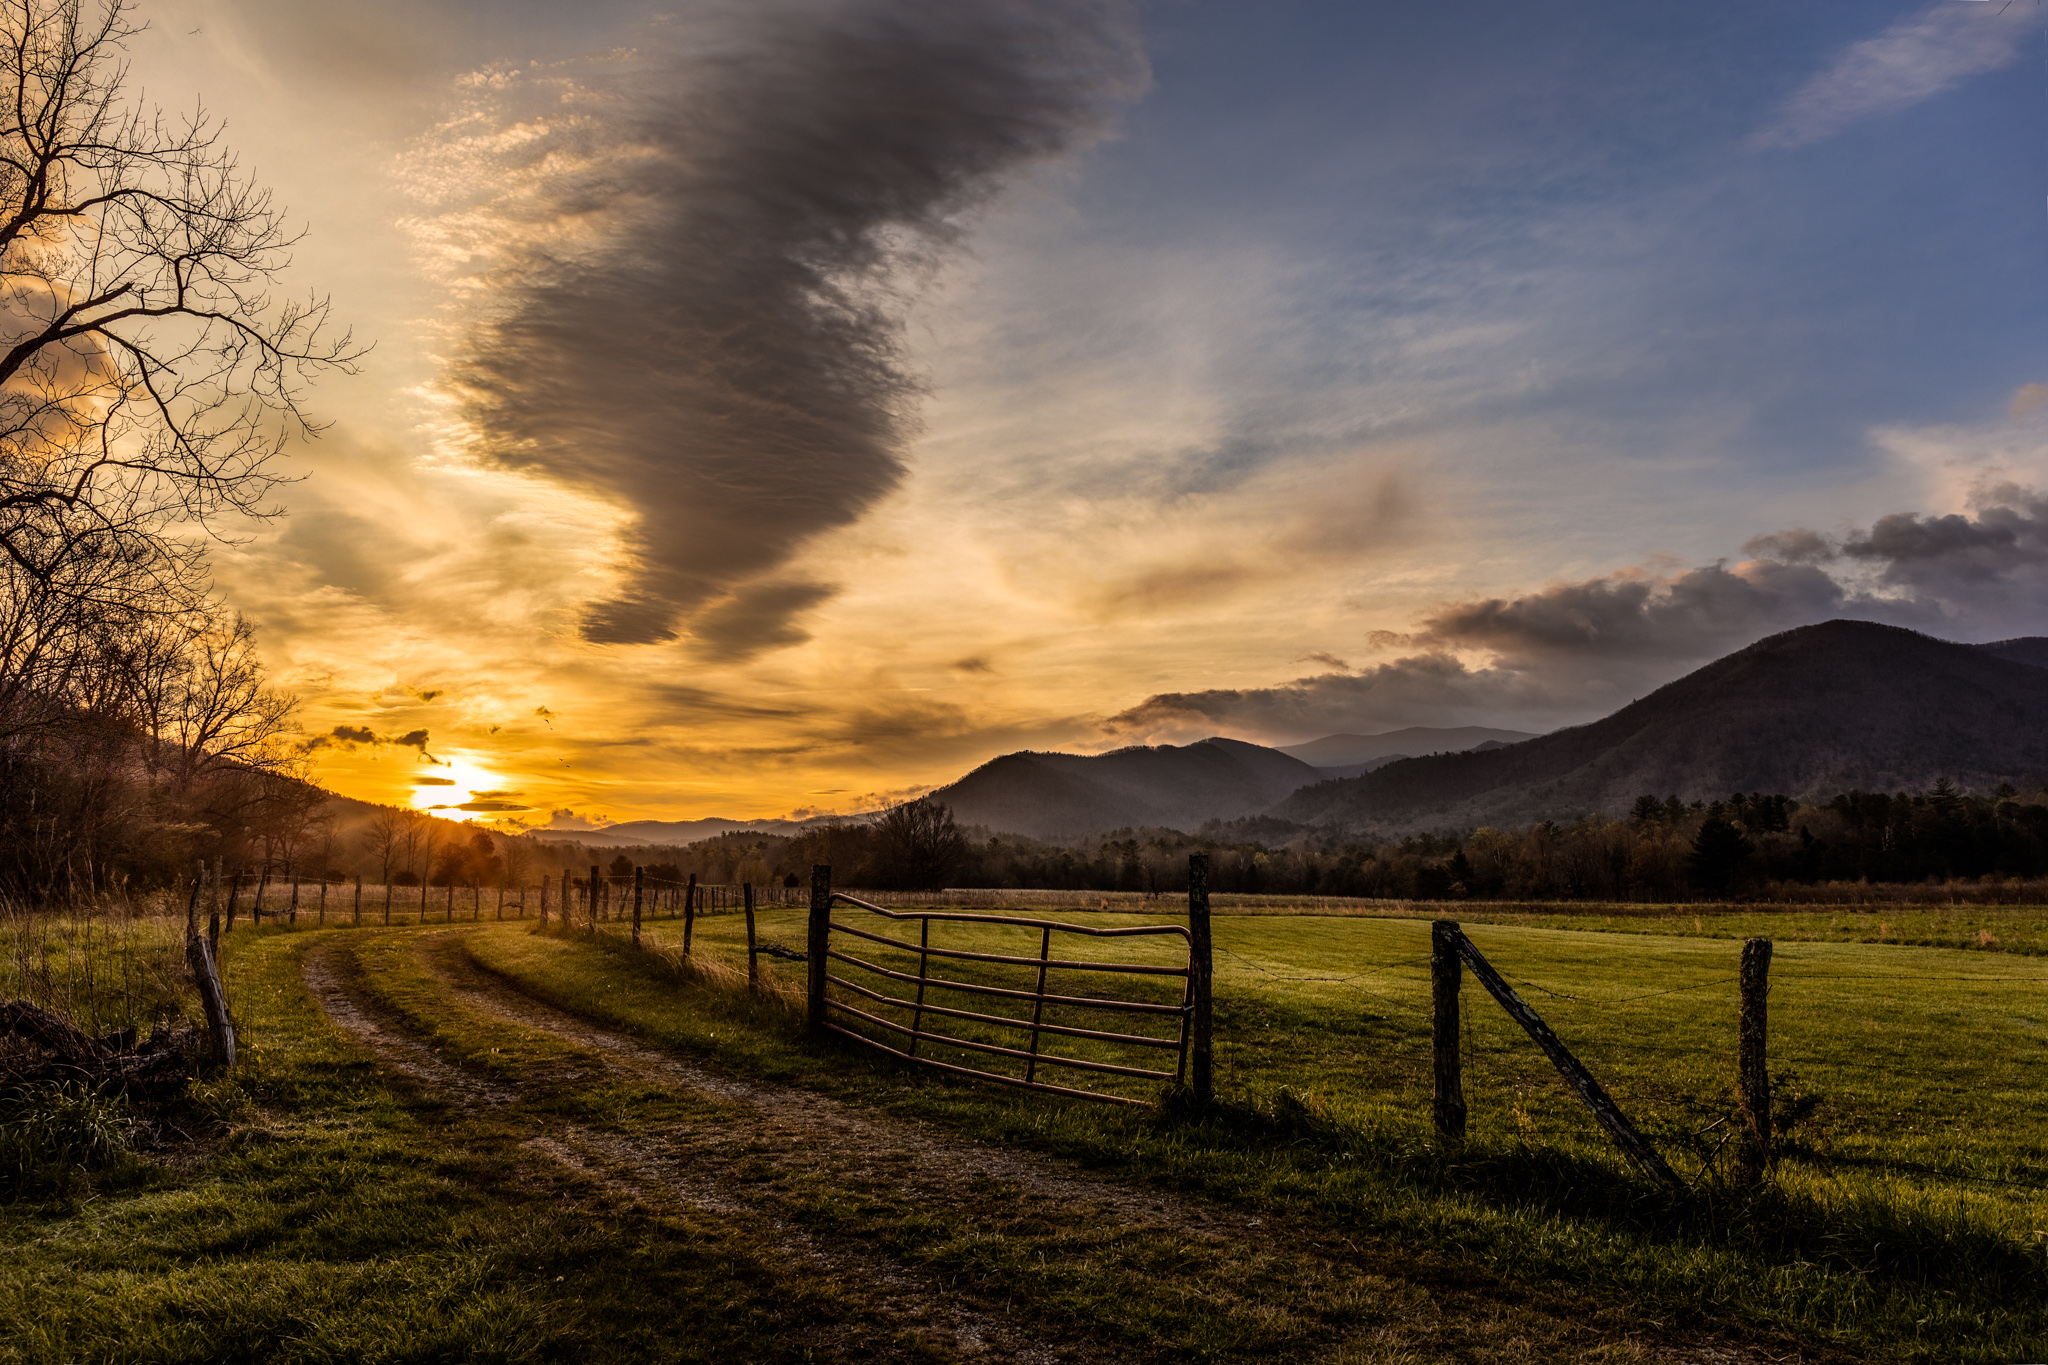 Cades Cove In Tennessee Was Named One Of The 45 Most Beautiful Places